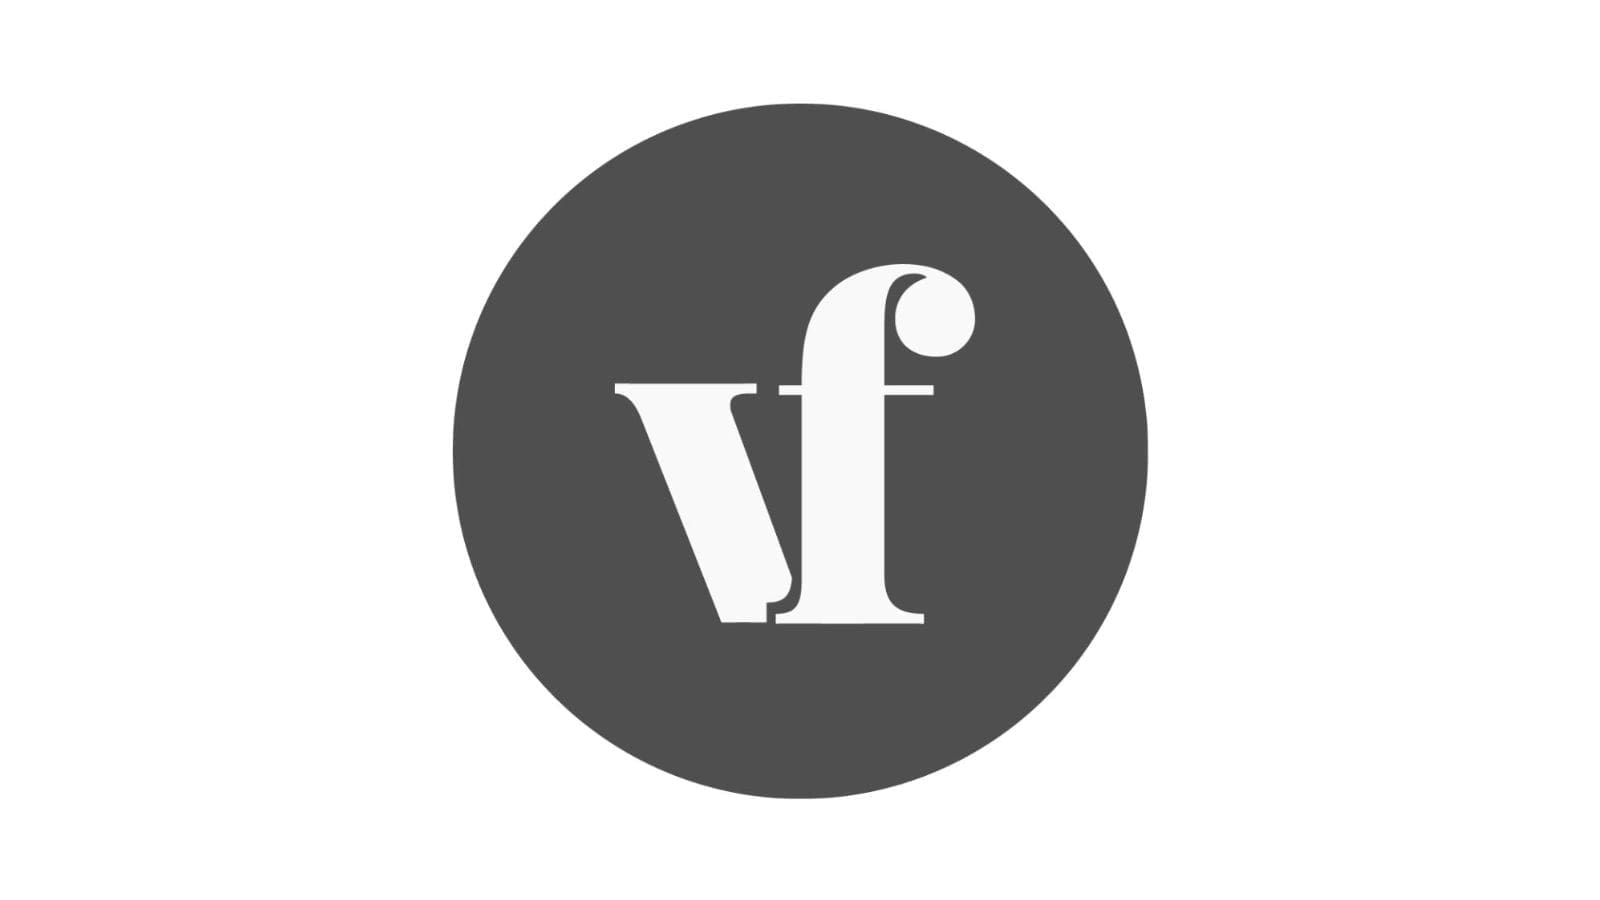 The letters "VF" on a black background.